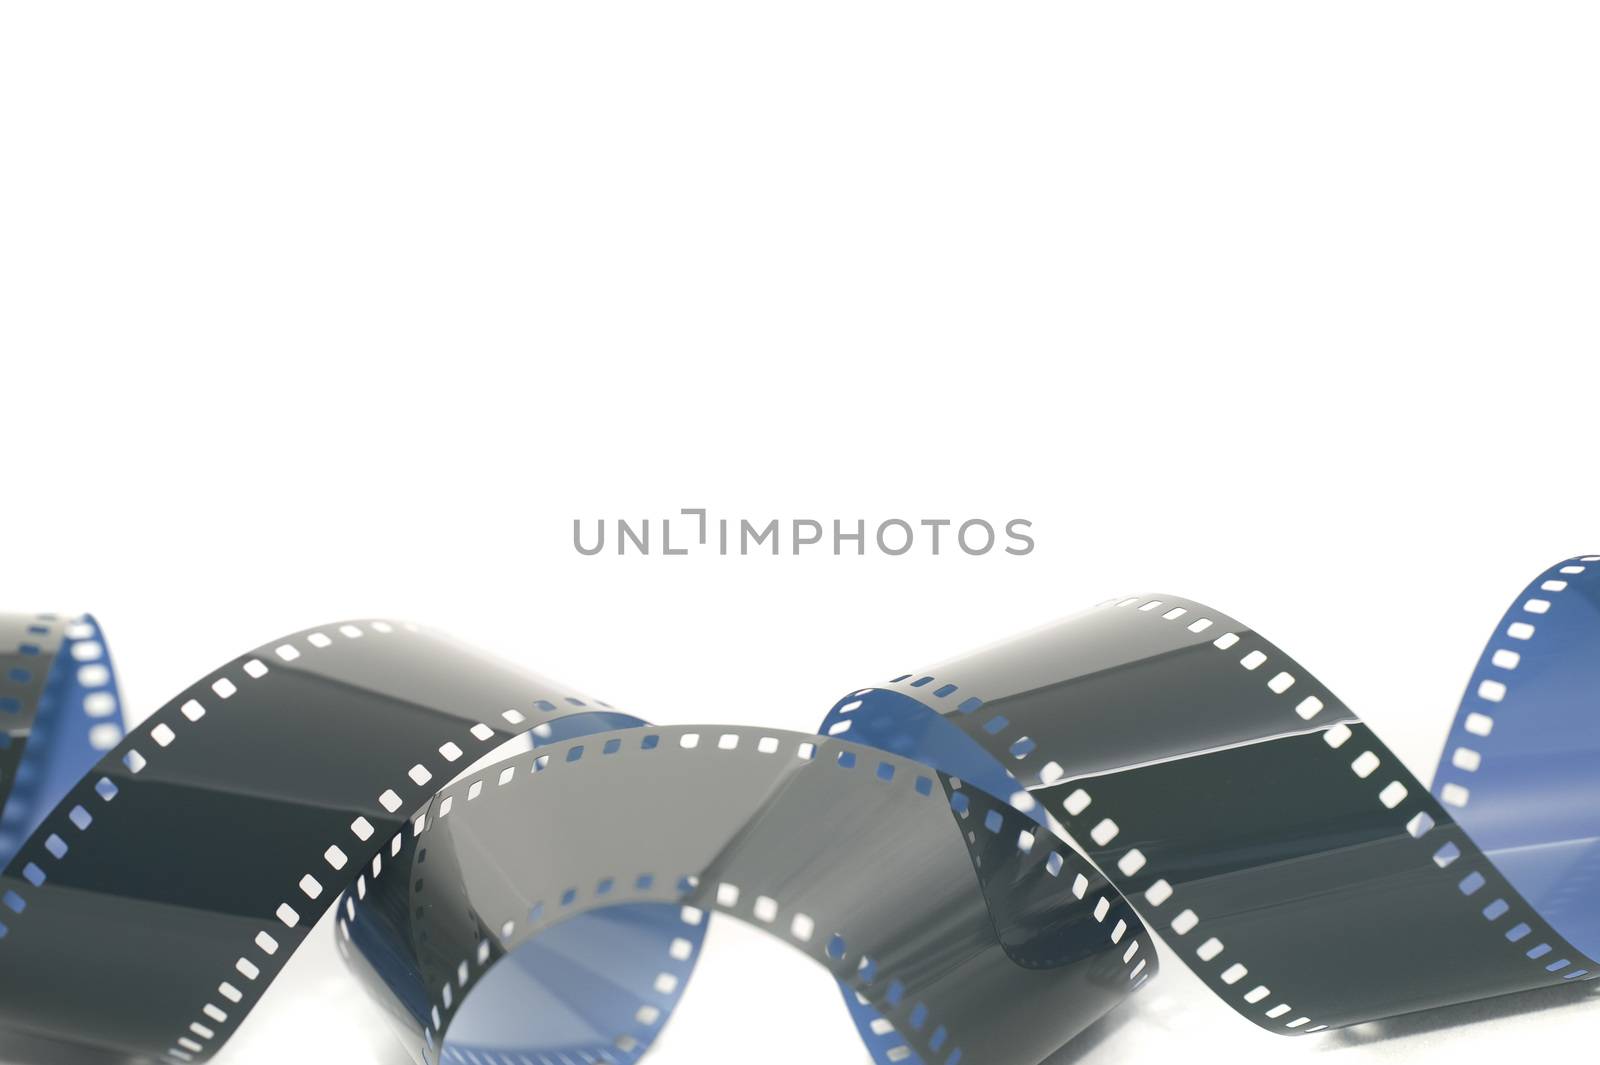 Coiled strip of 35mm photographic film unrolled and exposed forming a lower border over white with copy space